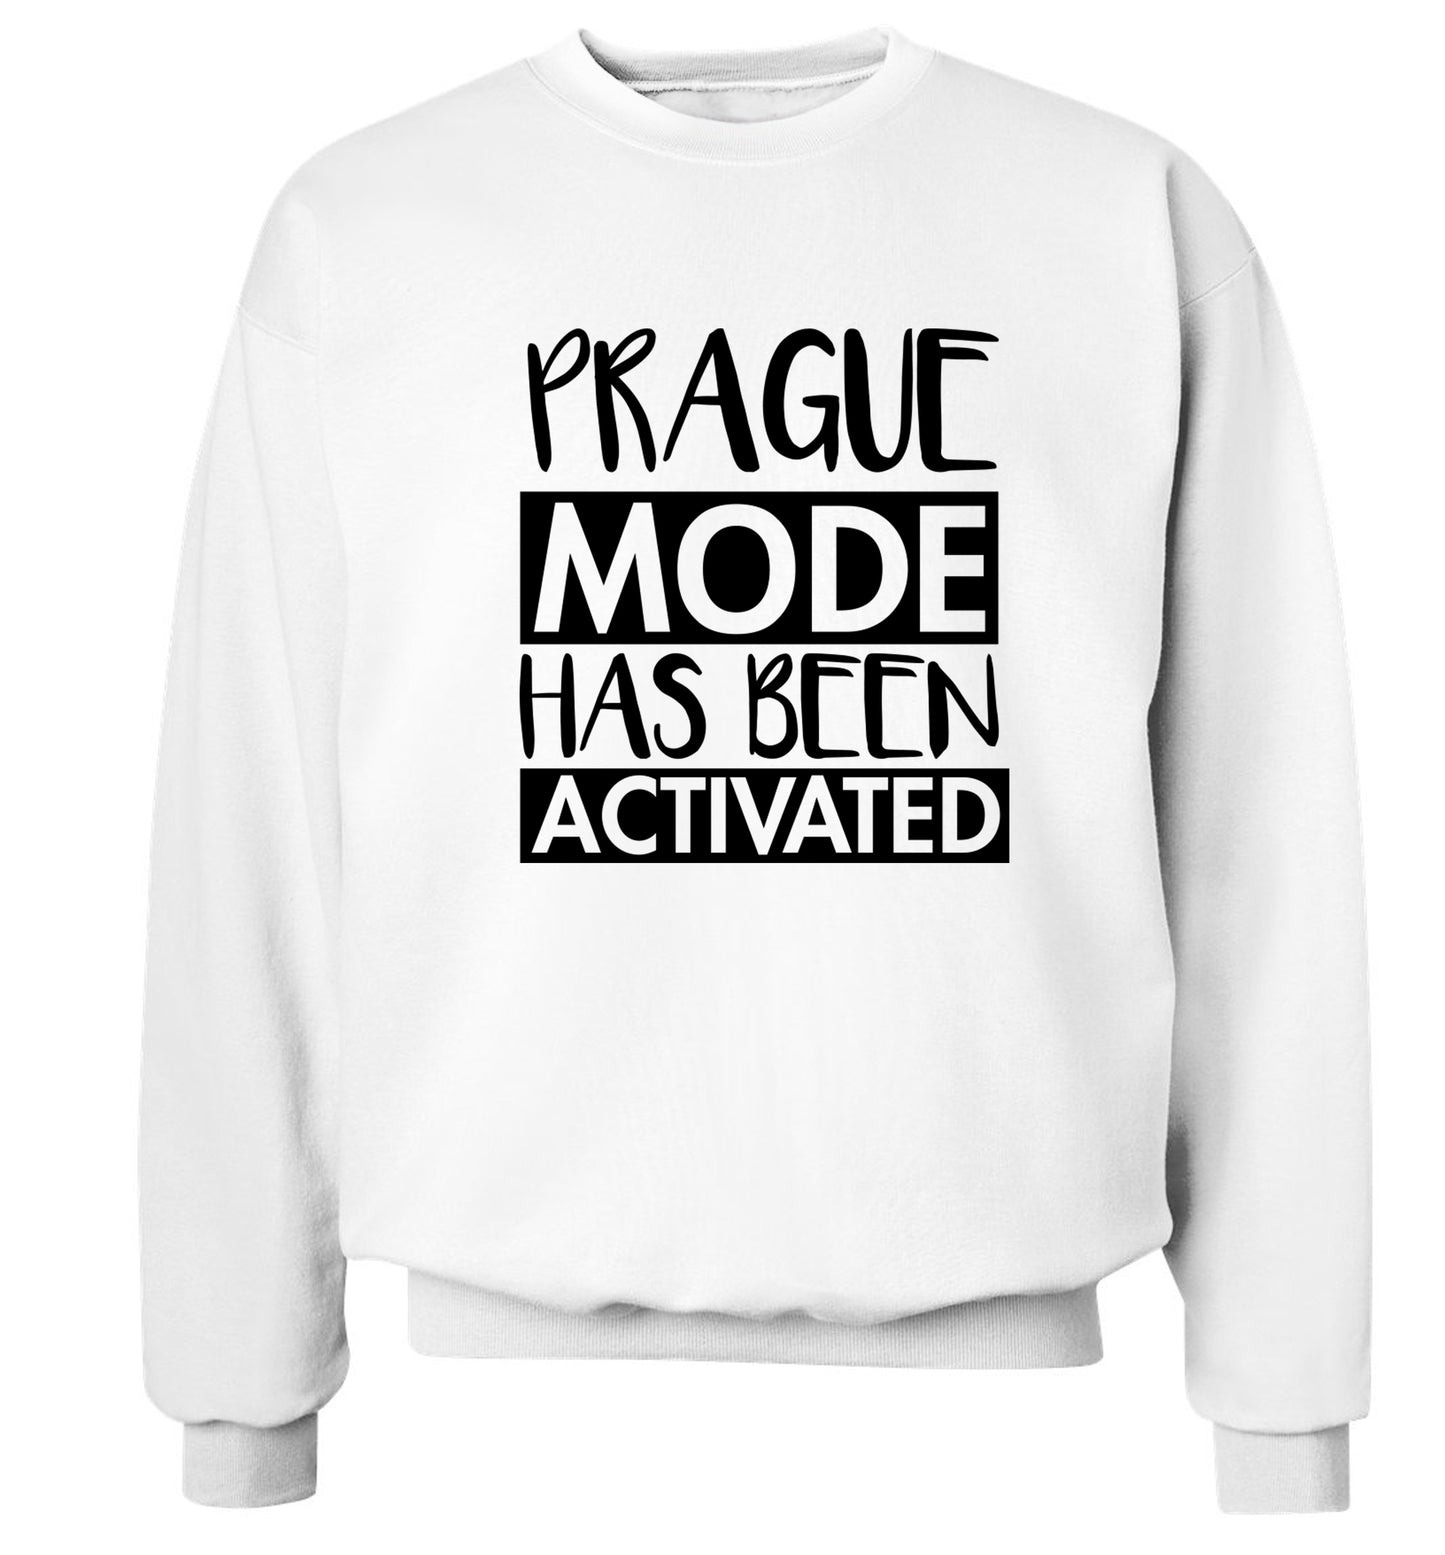 Prague mode has been activated Adult's unisex white Sweater 2XL